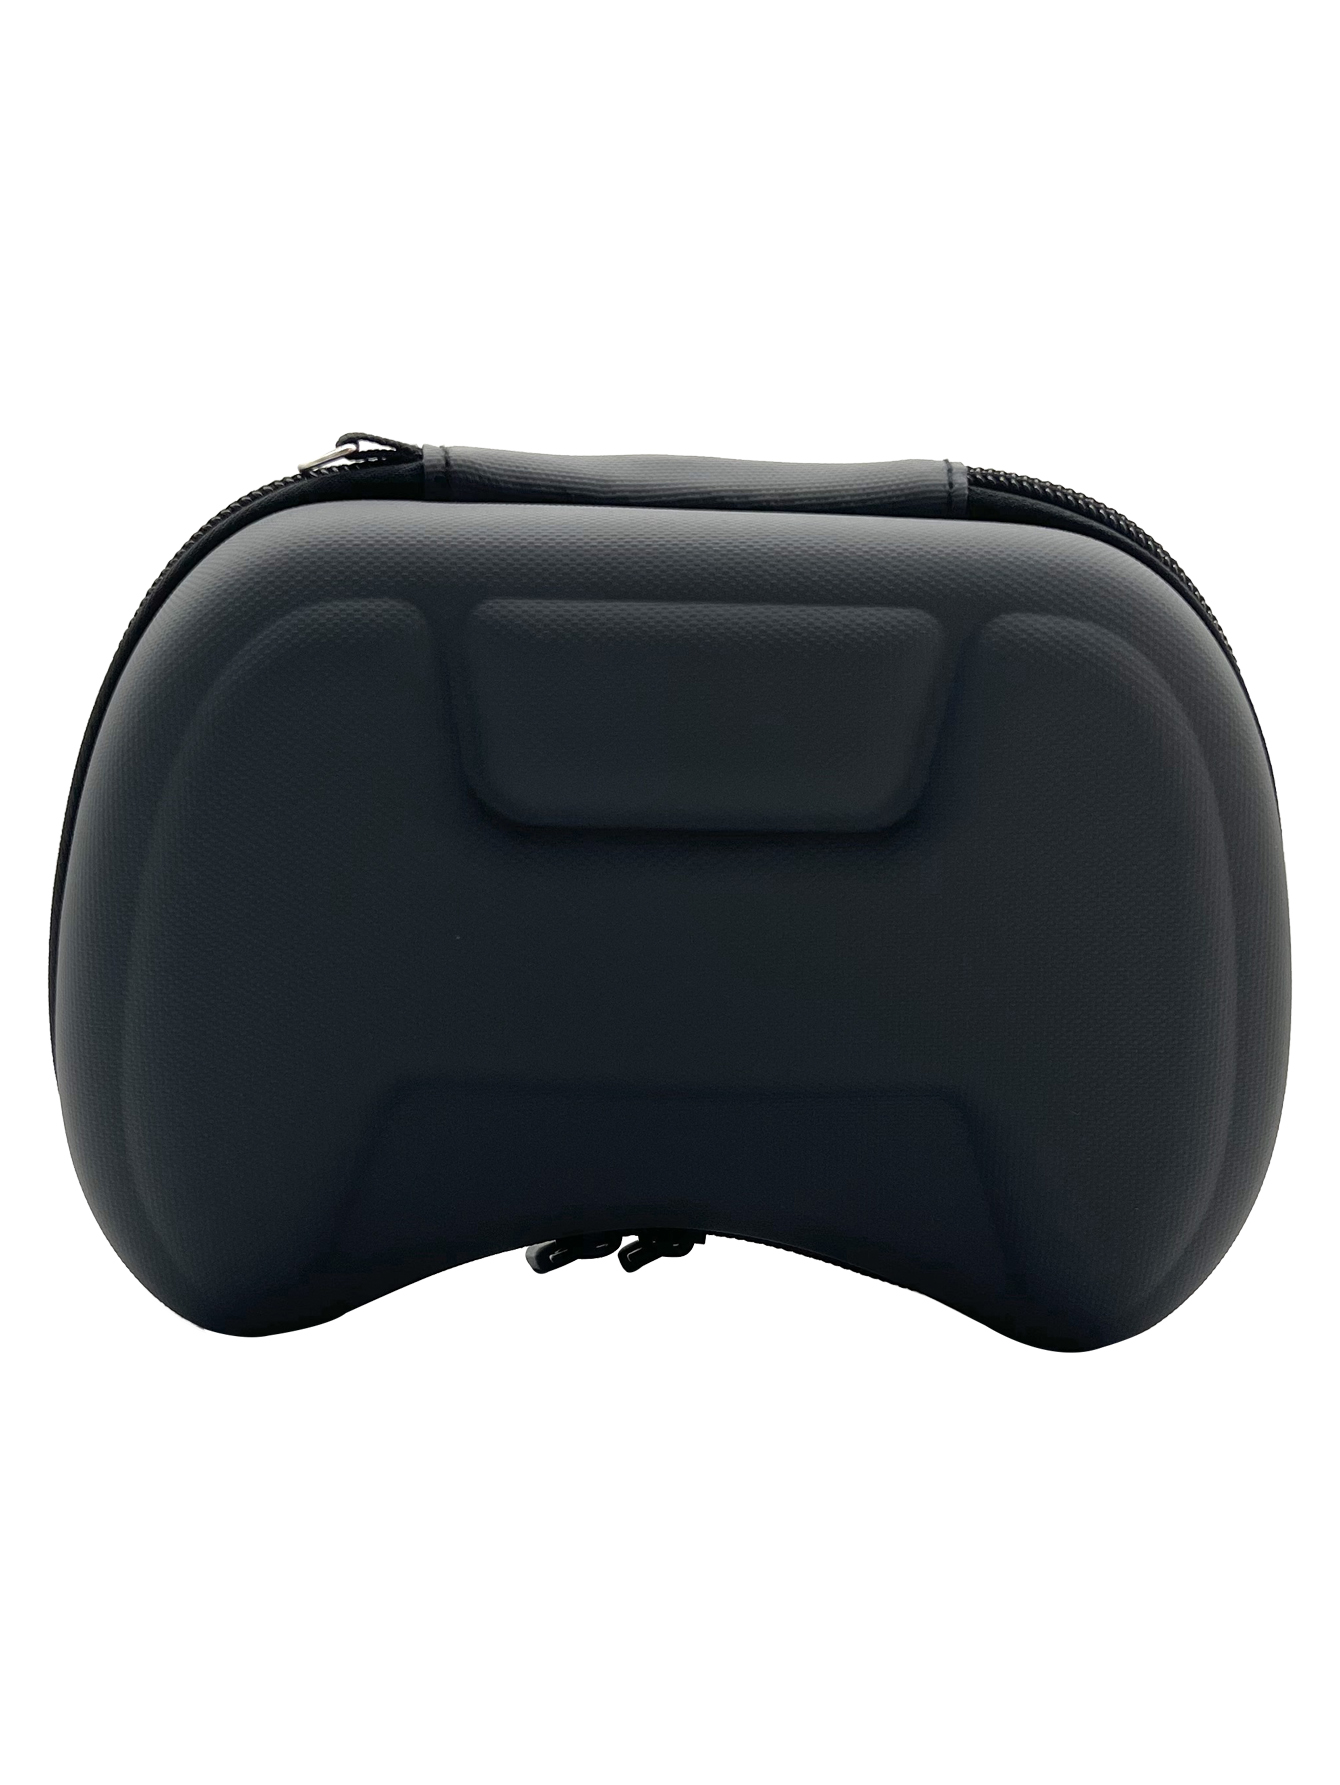 Manufacturer high quality EVA storage carrying case for Switch/Switch OLED Grip-con, Joypad, Joy-Con